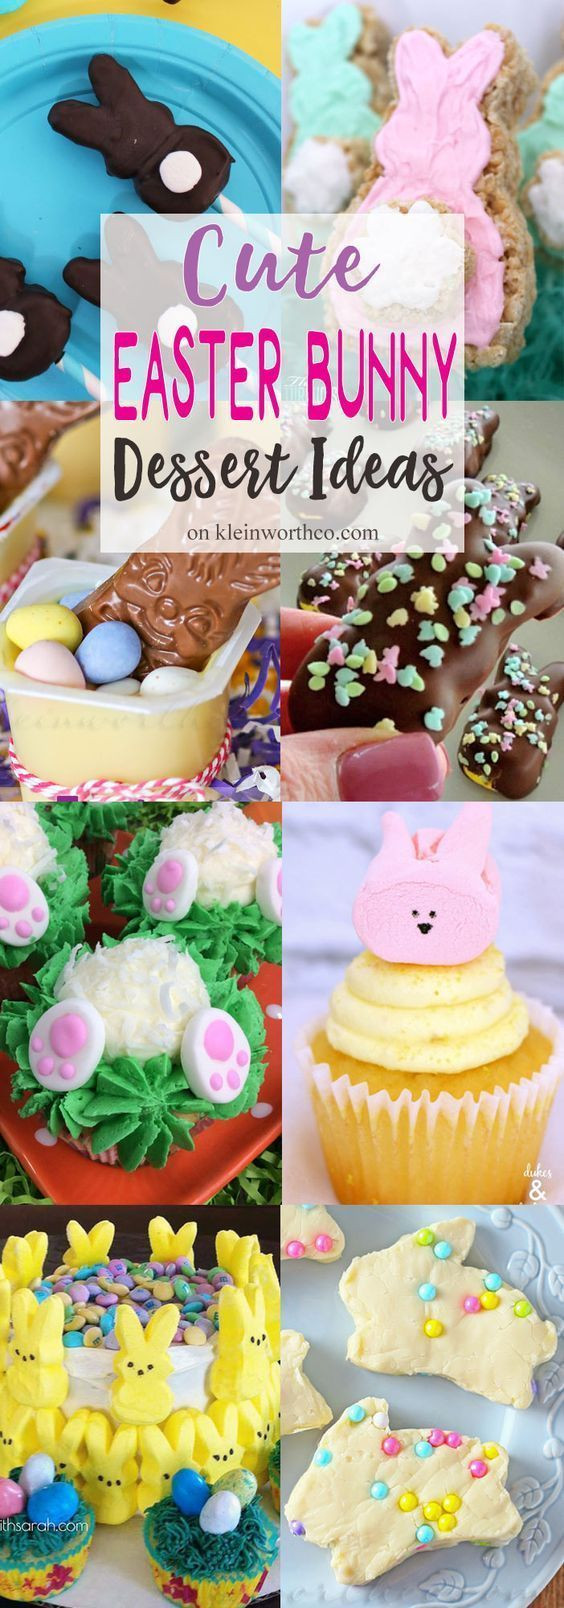 Cute Easy Easter Desserts
 Cute Easter Bunny Dessert Ideas to make your Easter super